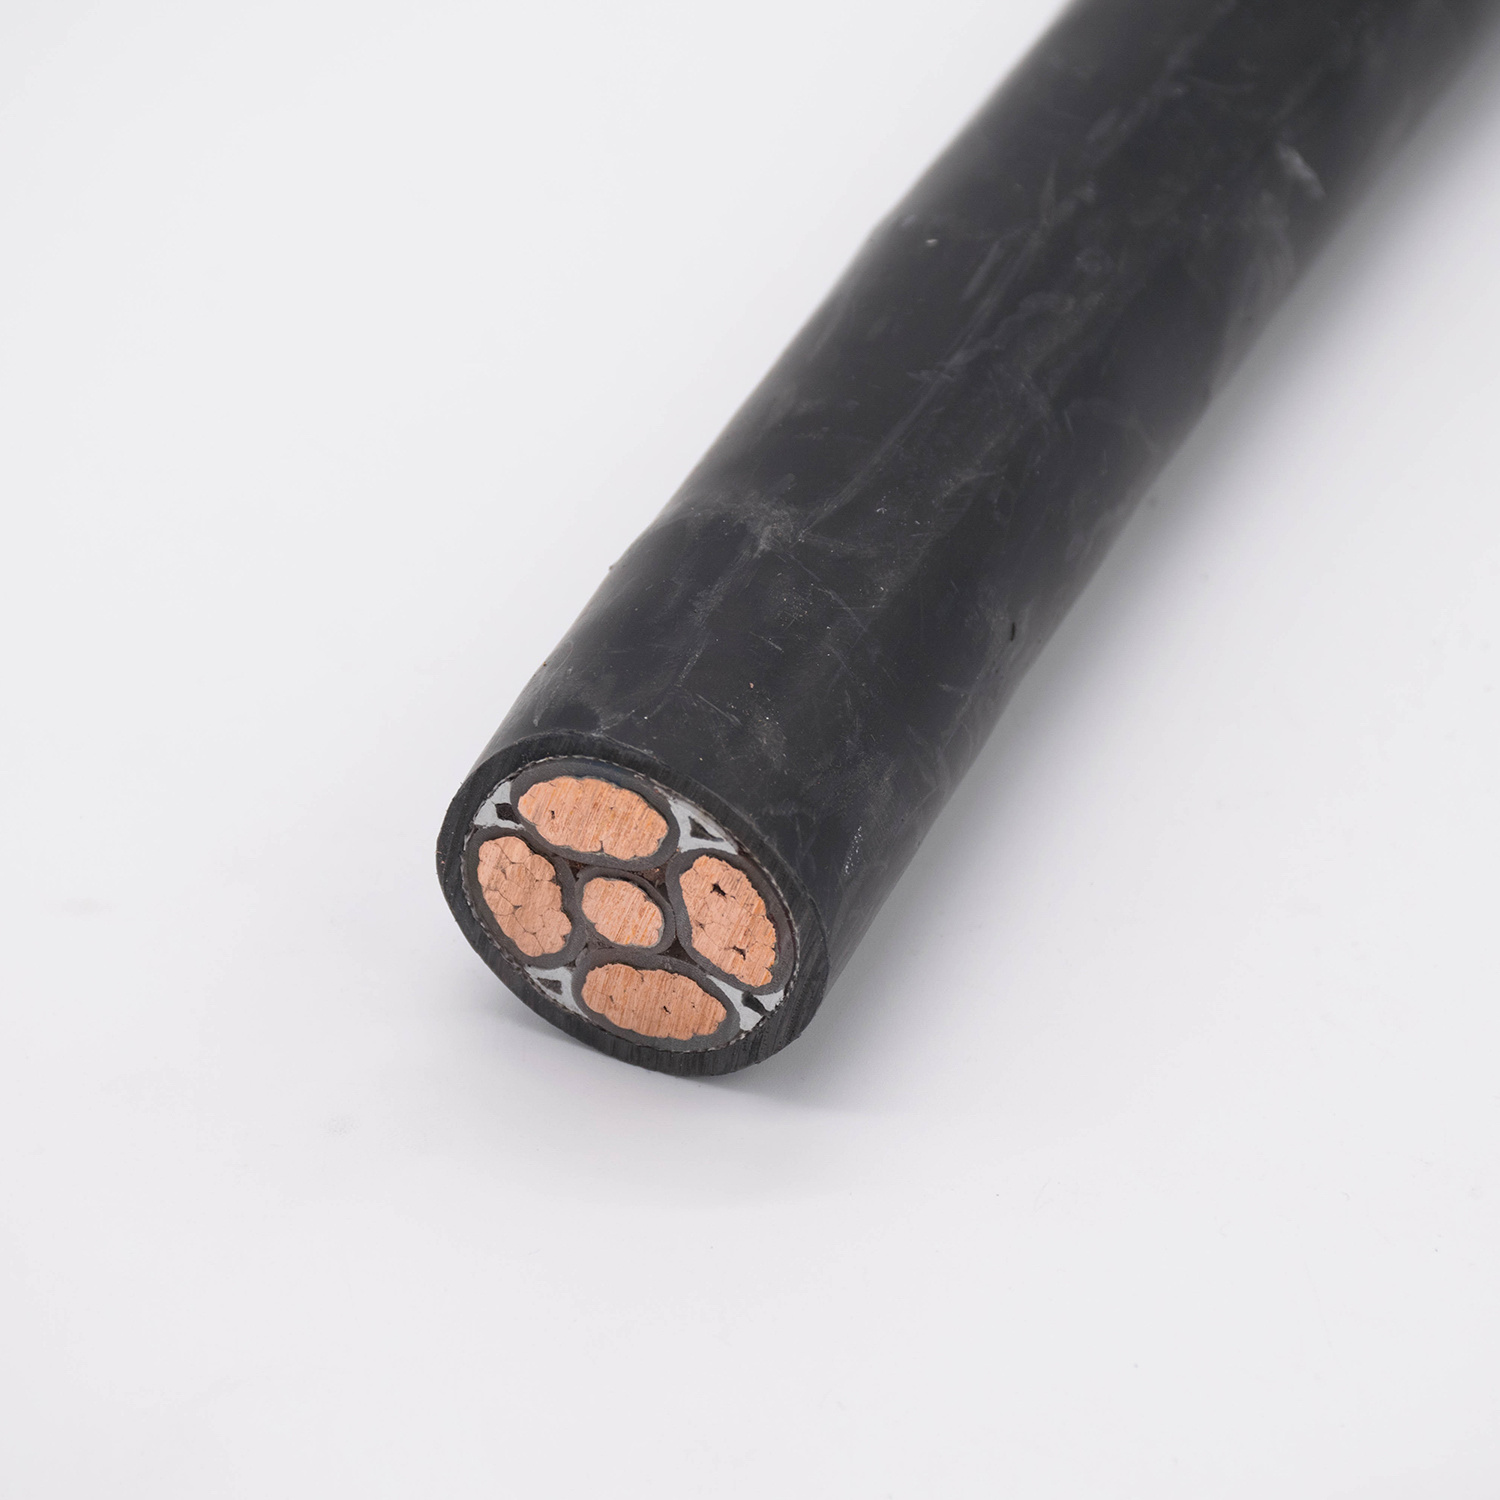 Made in Henan IEC605021 XLPE Insulation and PVC Outer Sheath Power Cable